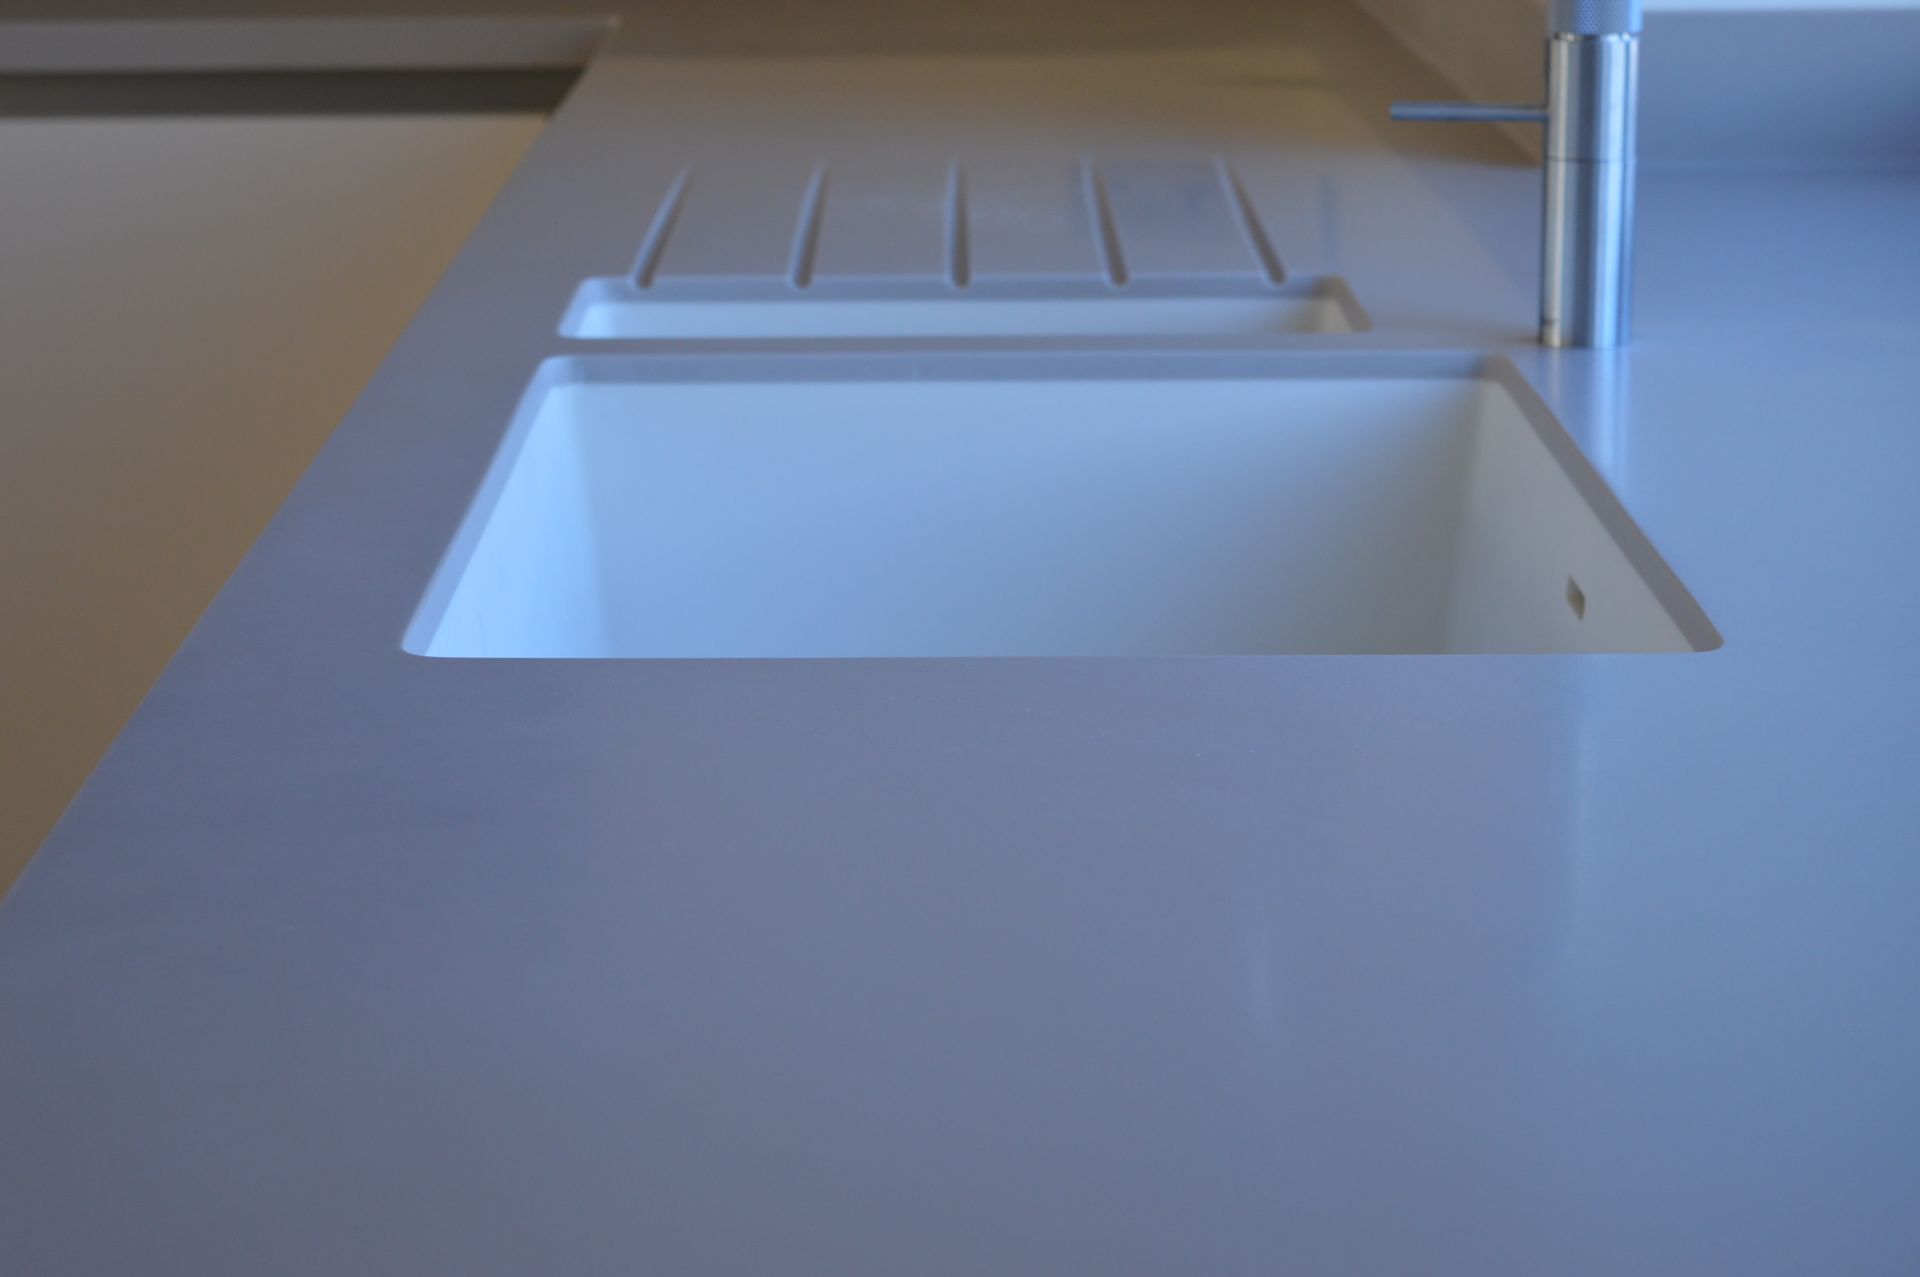 1 x Stunning KELLER Handleless FITTED KITCHEN With Corian Clay Worktops, Centre Island With - Image 62 of 104